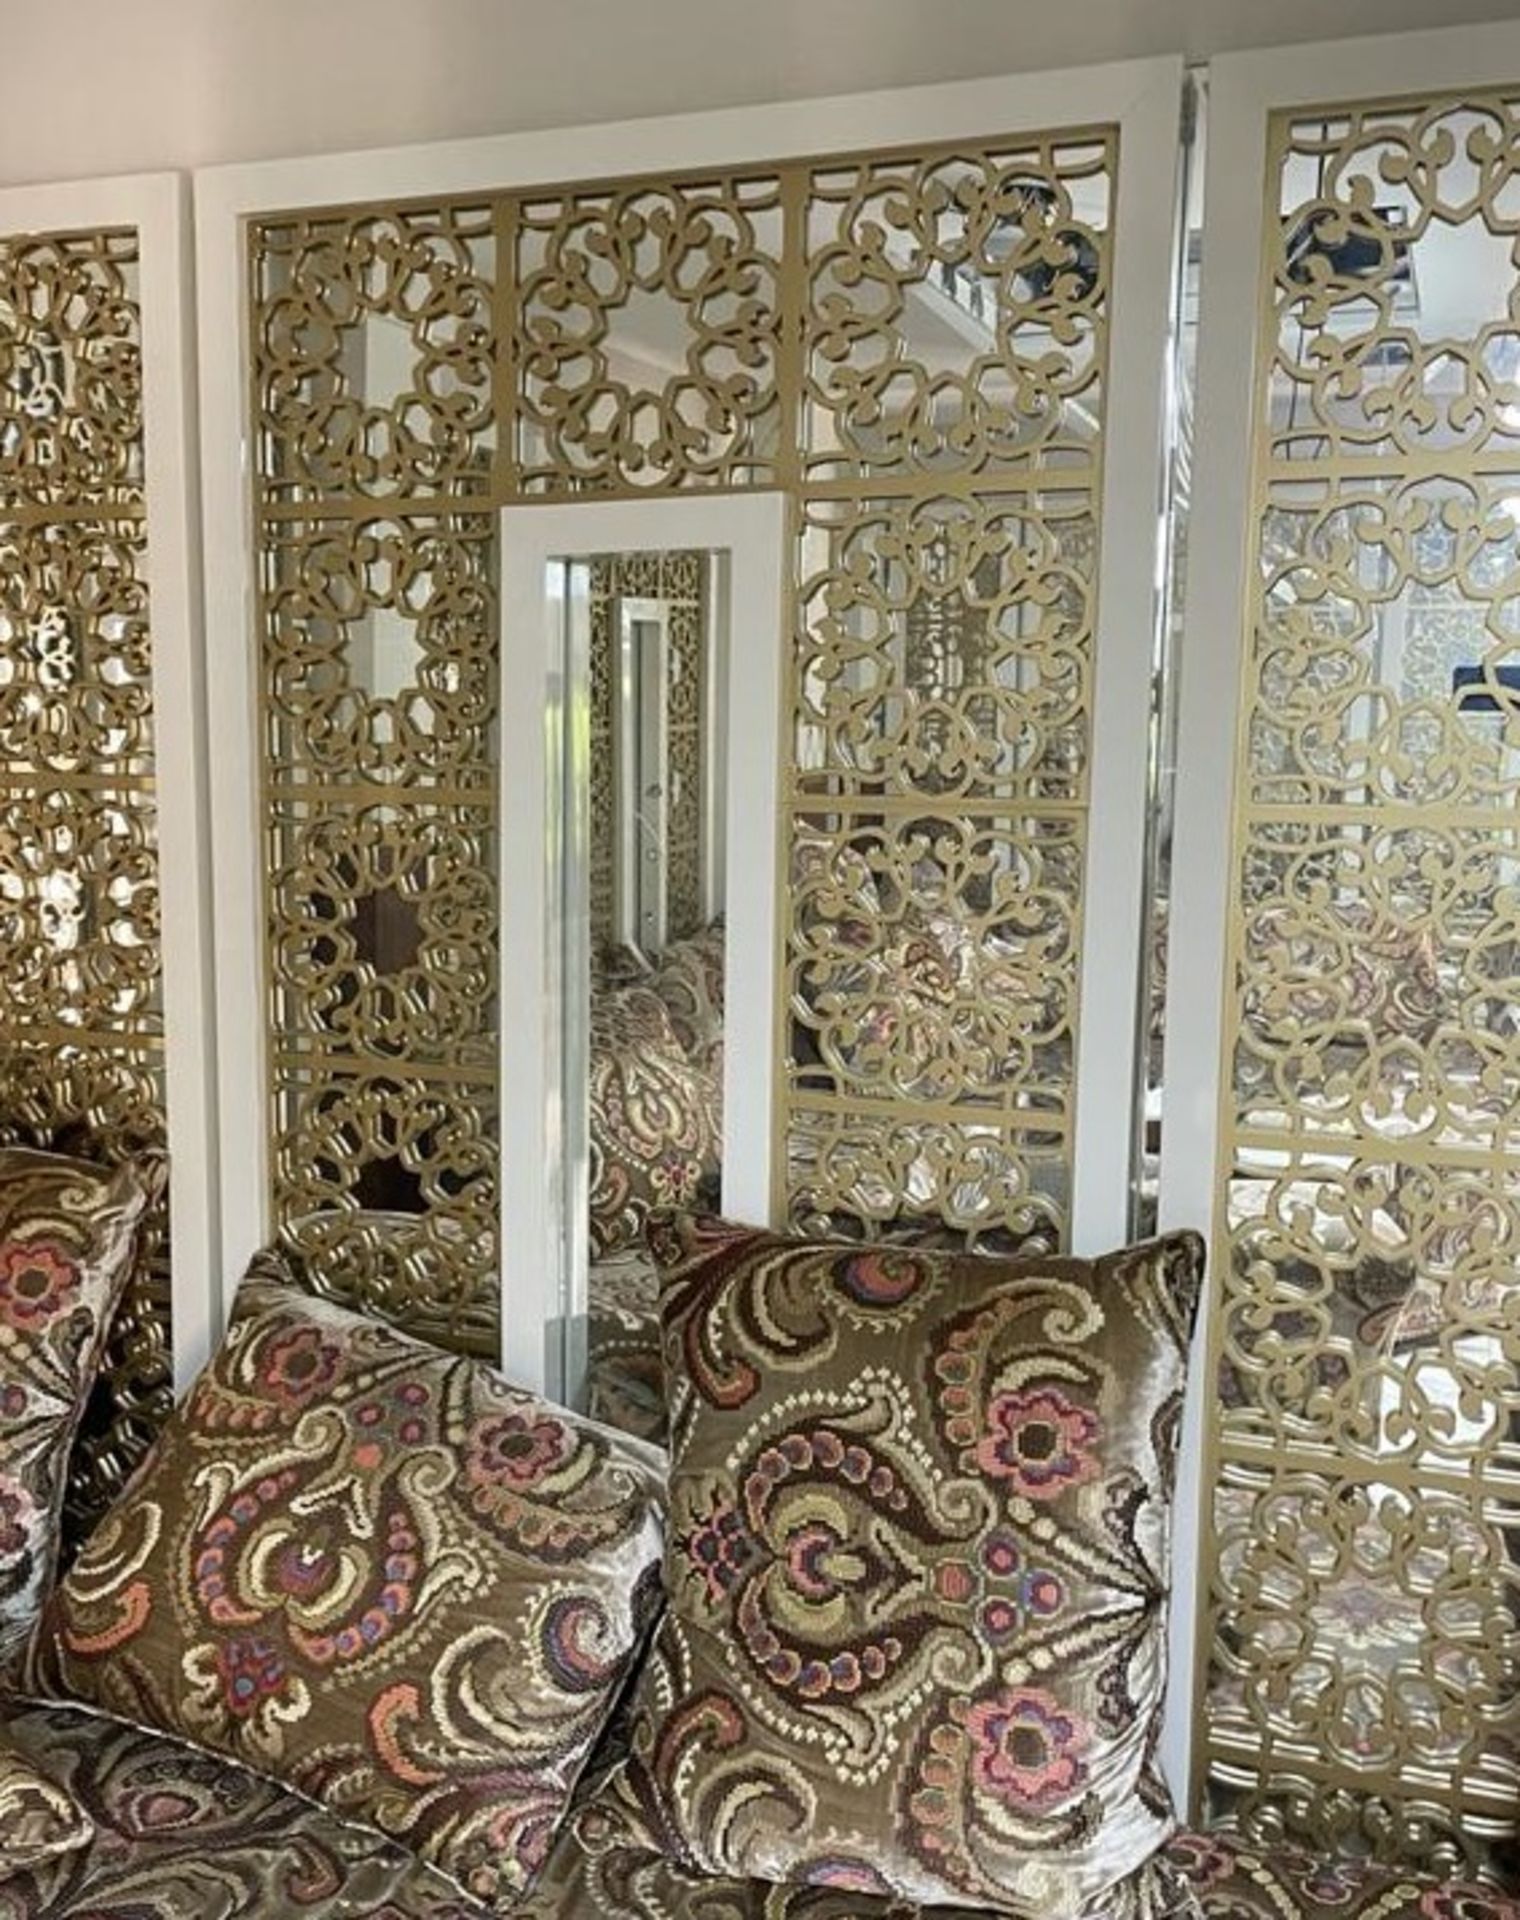 A Set Of 4 x Moroccan-style Room Divider Screen Panels  - Ref: HMS108 - CL668 - Location: Altrincham